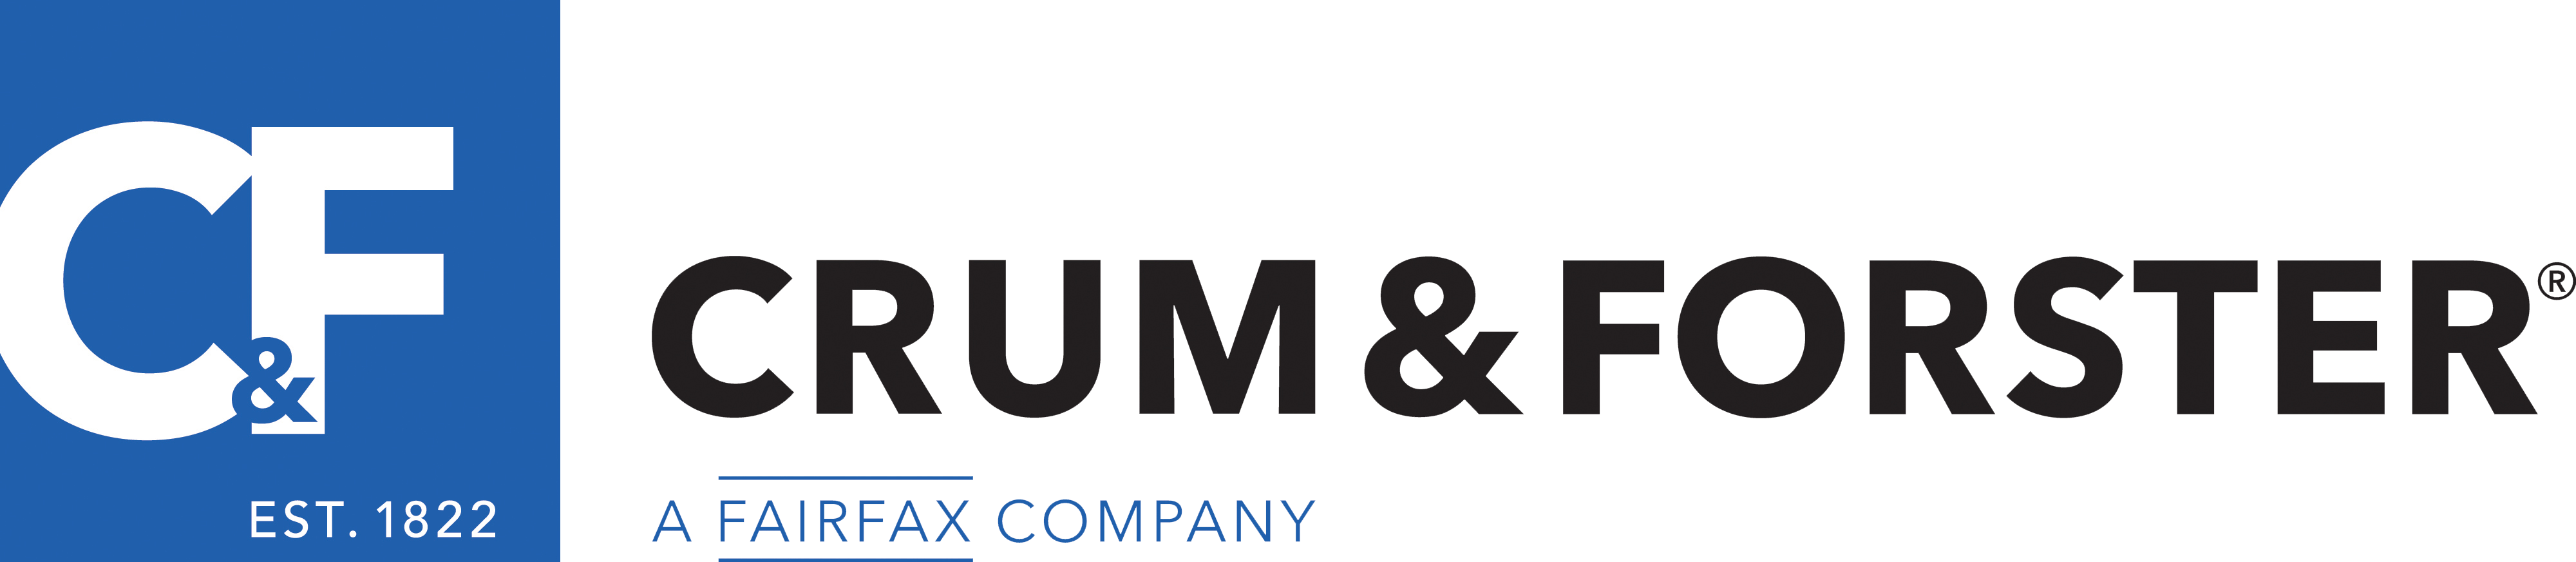 crum and forster logo